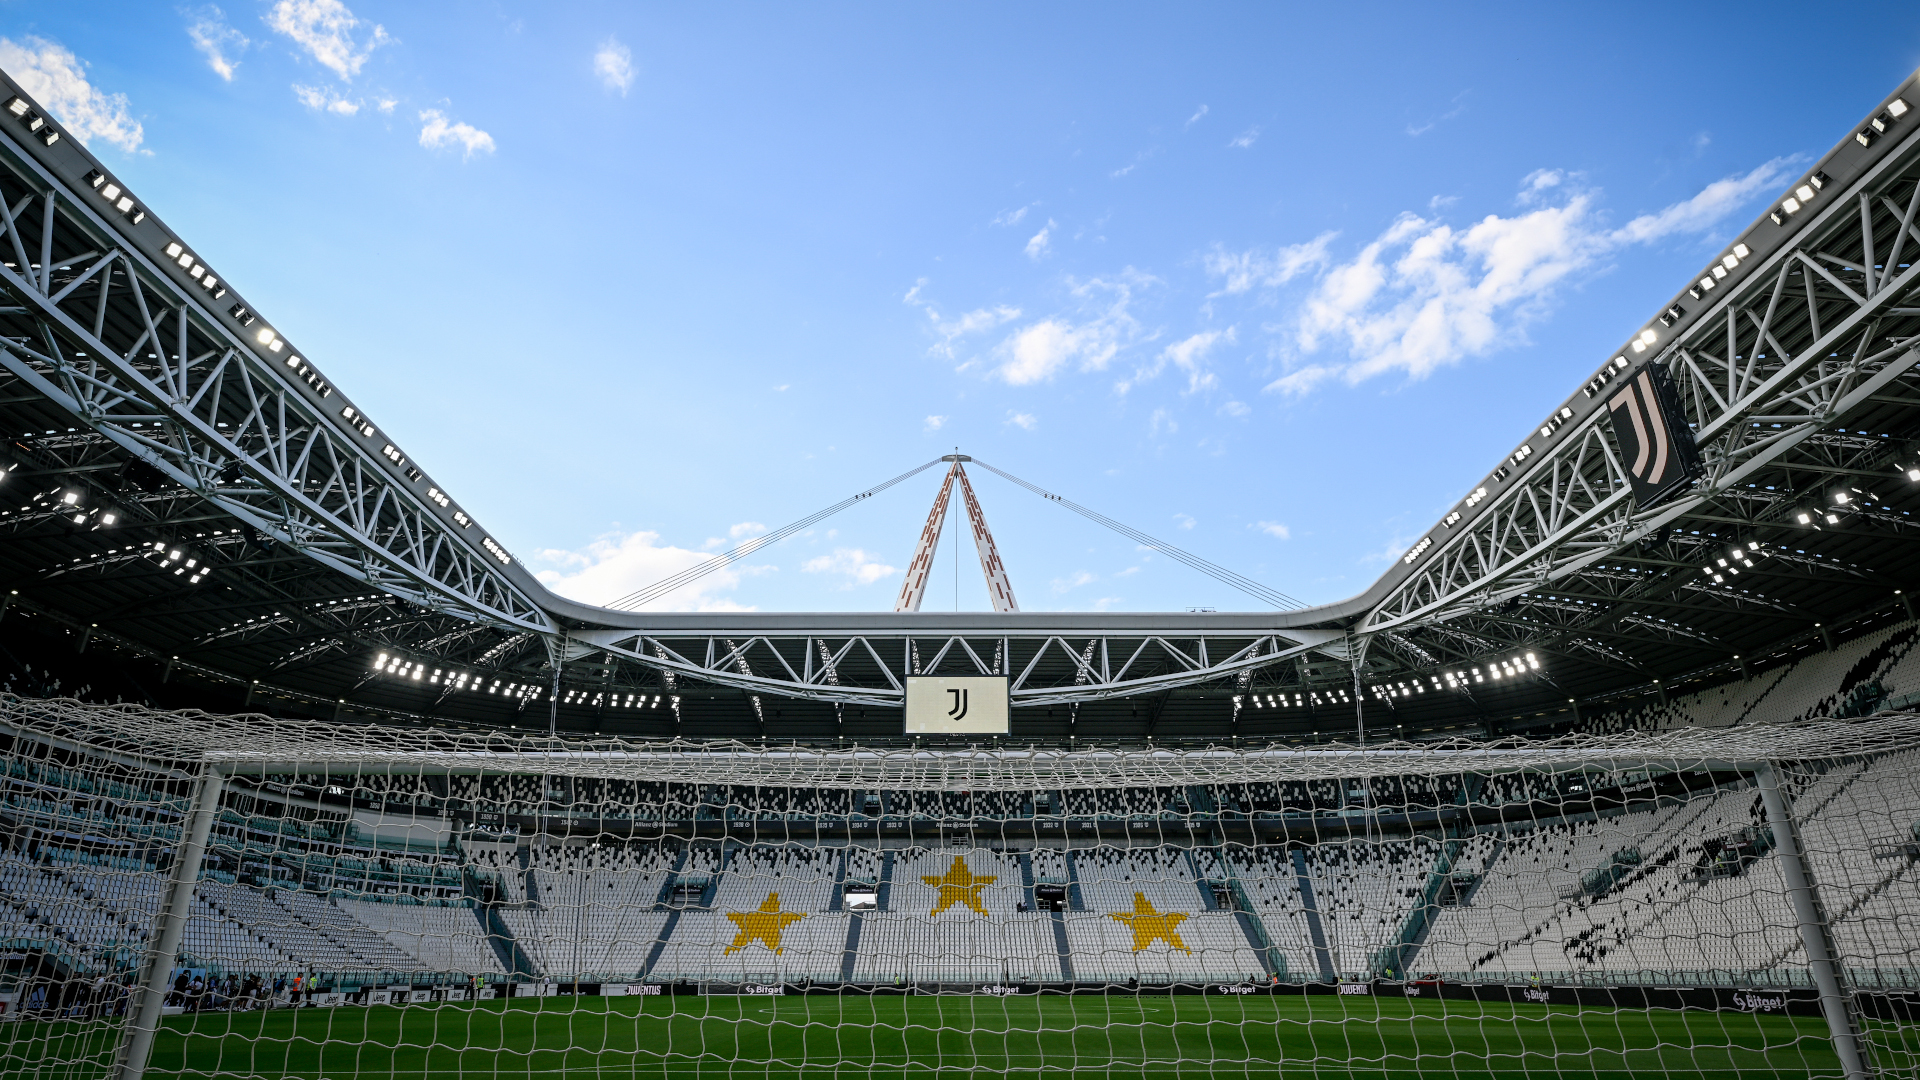 Juventus vs Torino: Live stream, TV channel, kick-off time & where to watch